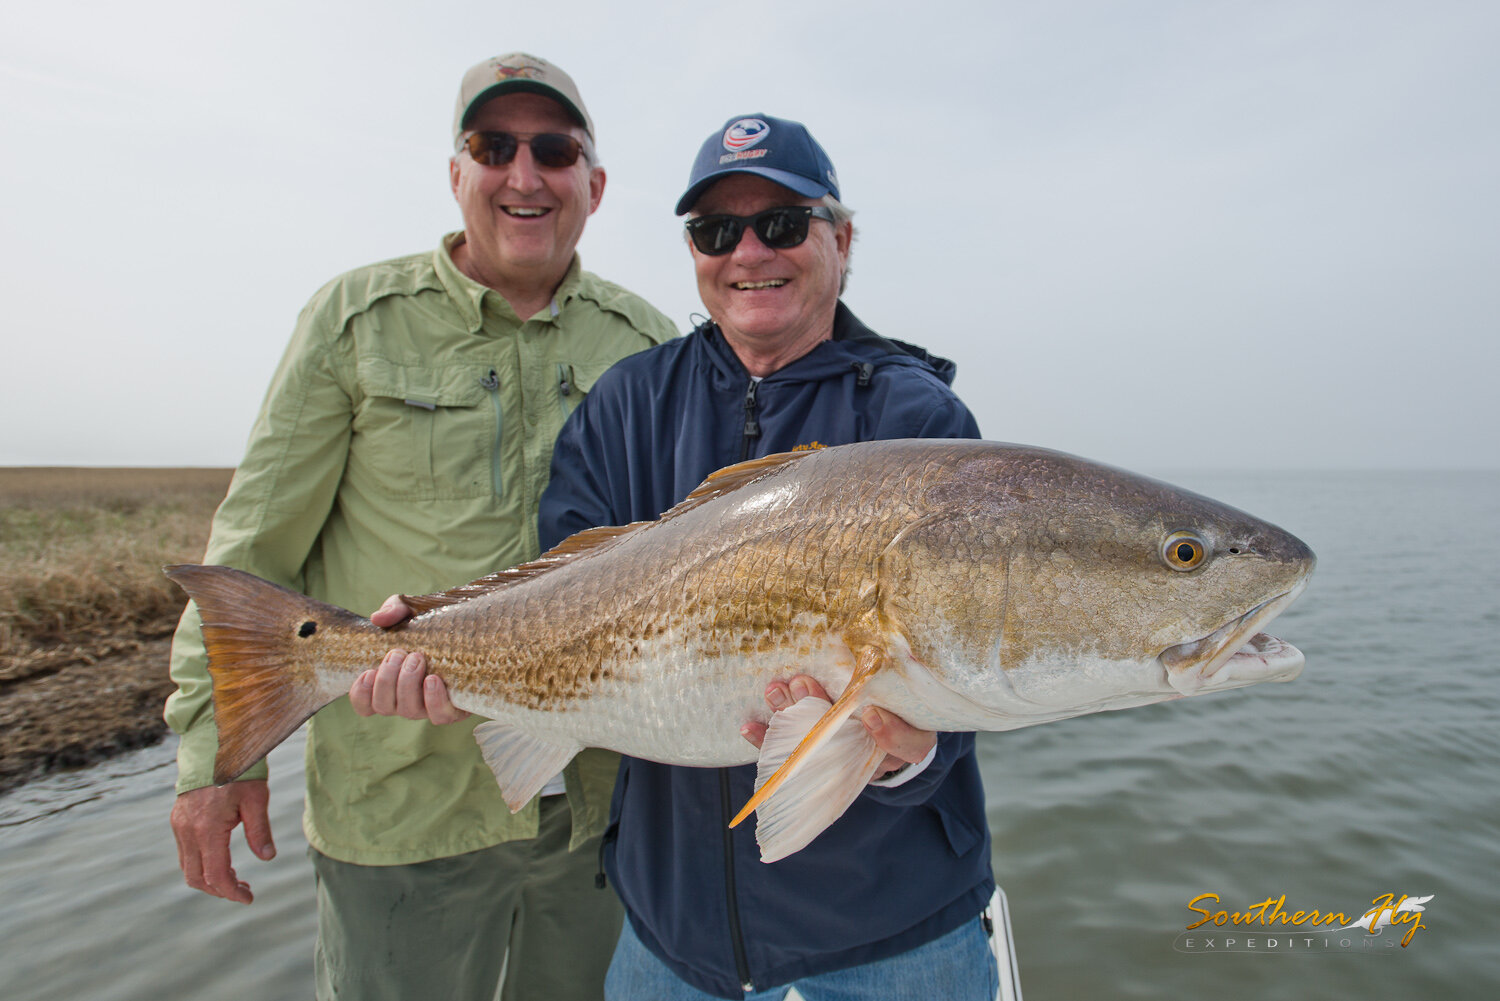 2020-01-16_SouthernFlyExpeditions_NewOrleans_RickCrivelloneAndMikePurcell-2.jpg